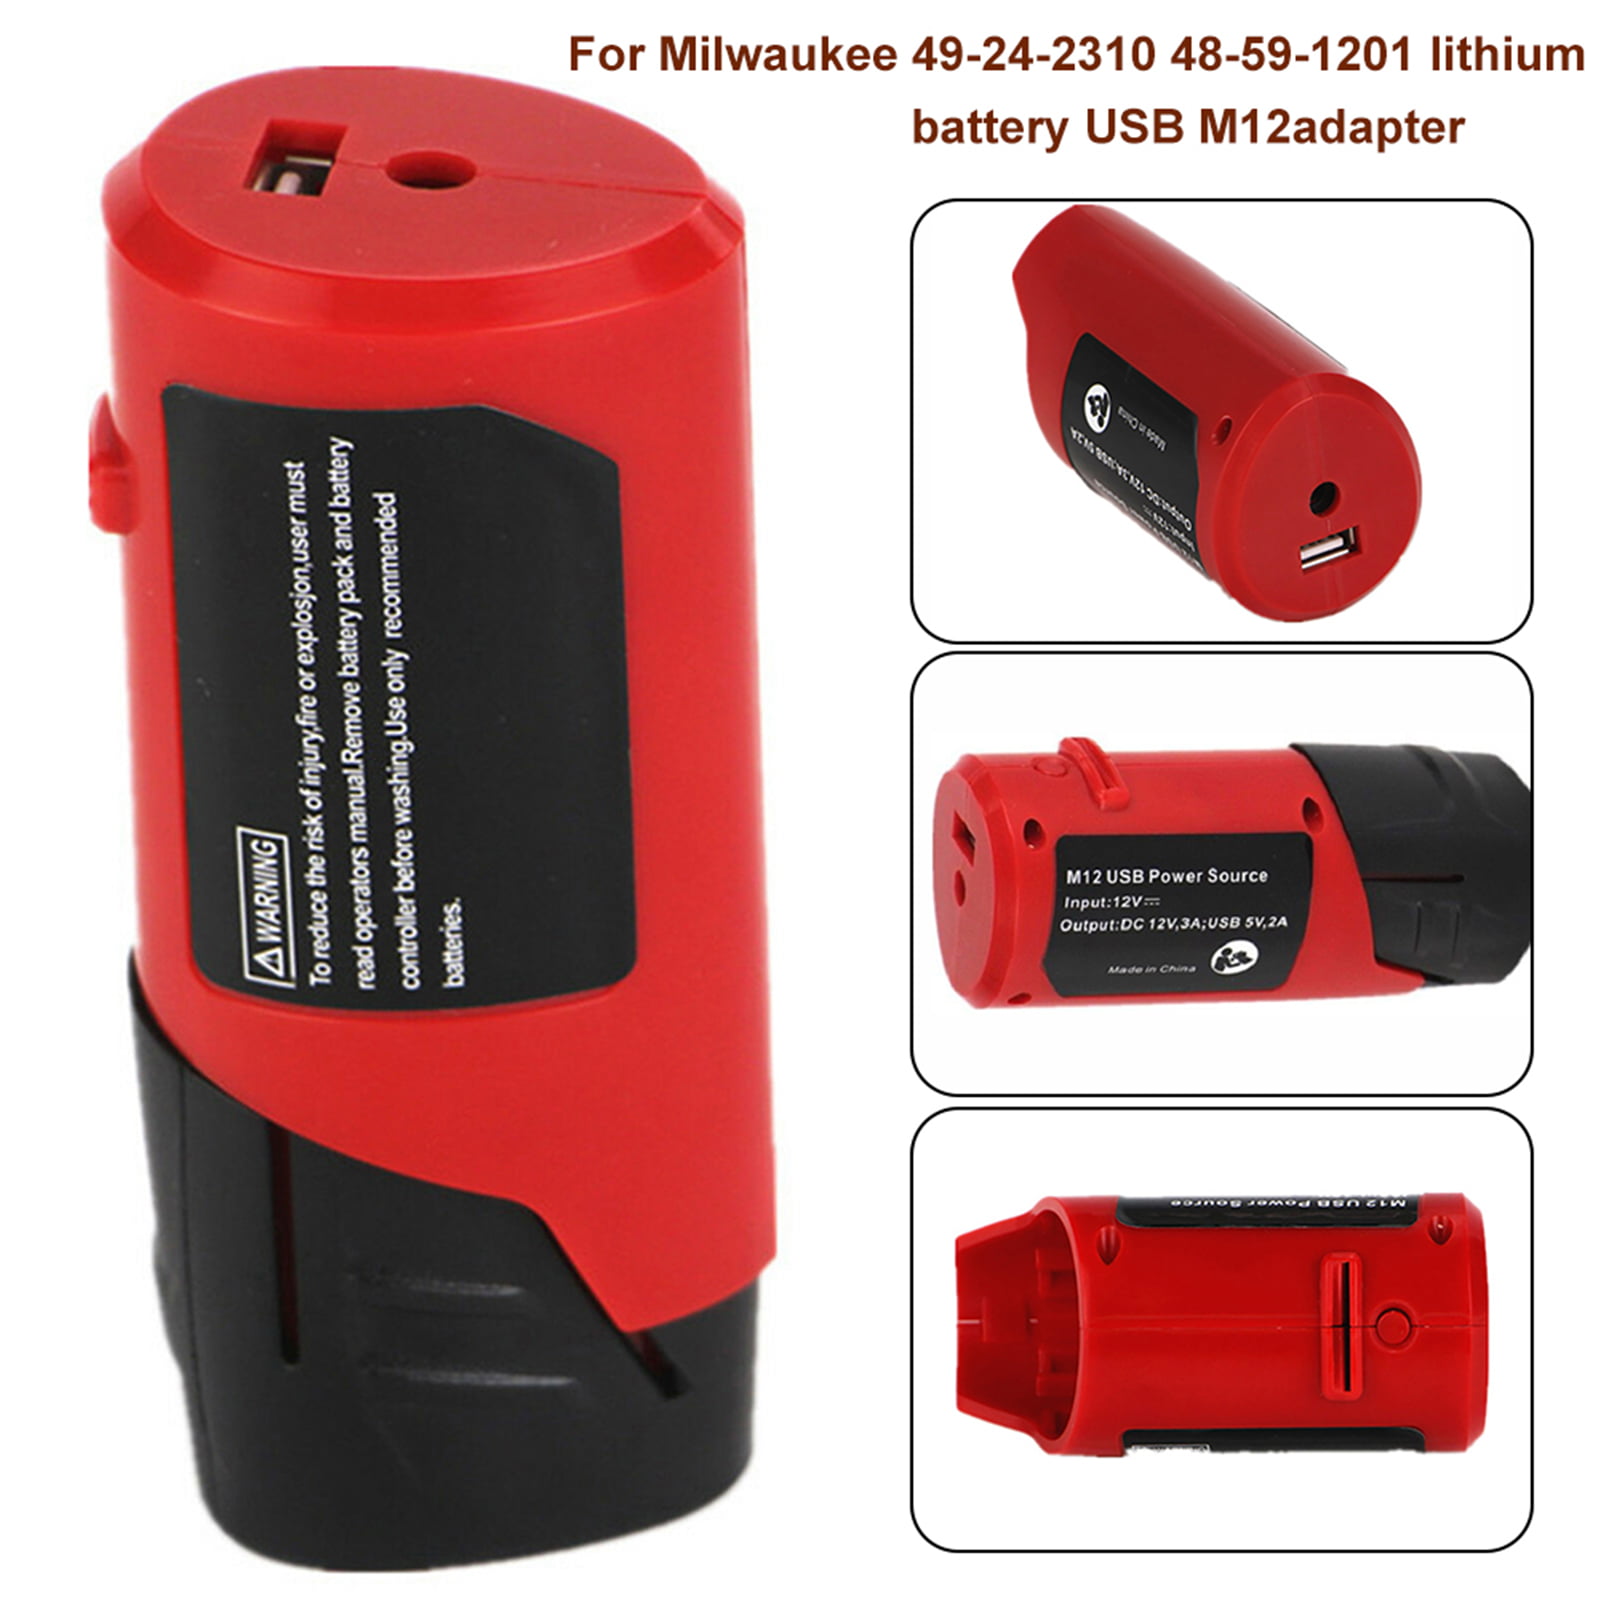 USB Charger Adapter for Milwaukee 12V Lithium Battery, Low-Voltage Protection M12 Adapter with DC 12V Outlet Charge Milwaukee Heated Red - Walmart.com